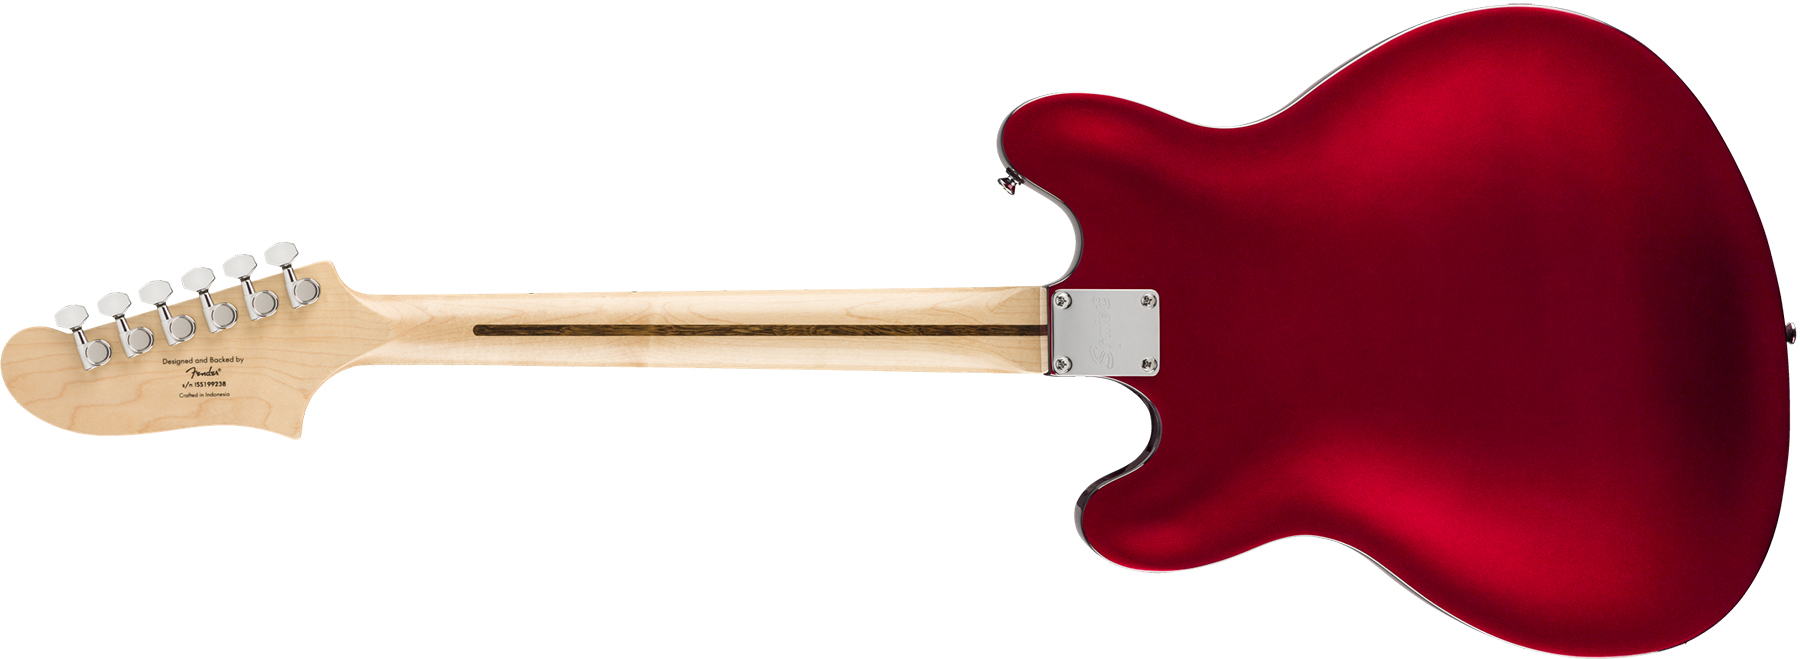 Squier Starcaster Affinity 2019 Hh Ht Mn - Candy Apple Red - Semi-hollow electric guitar - Variation 1